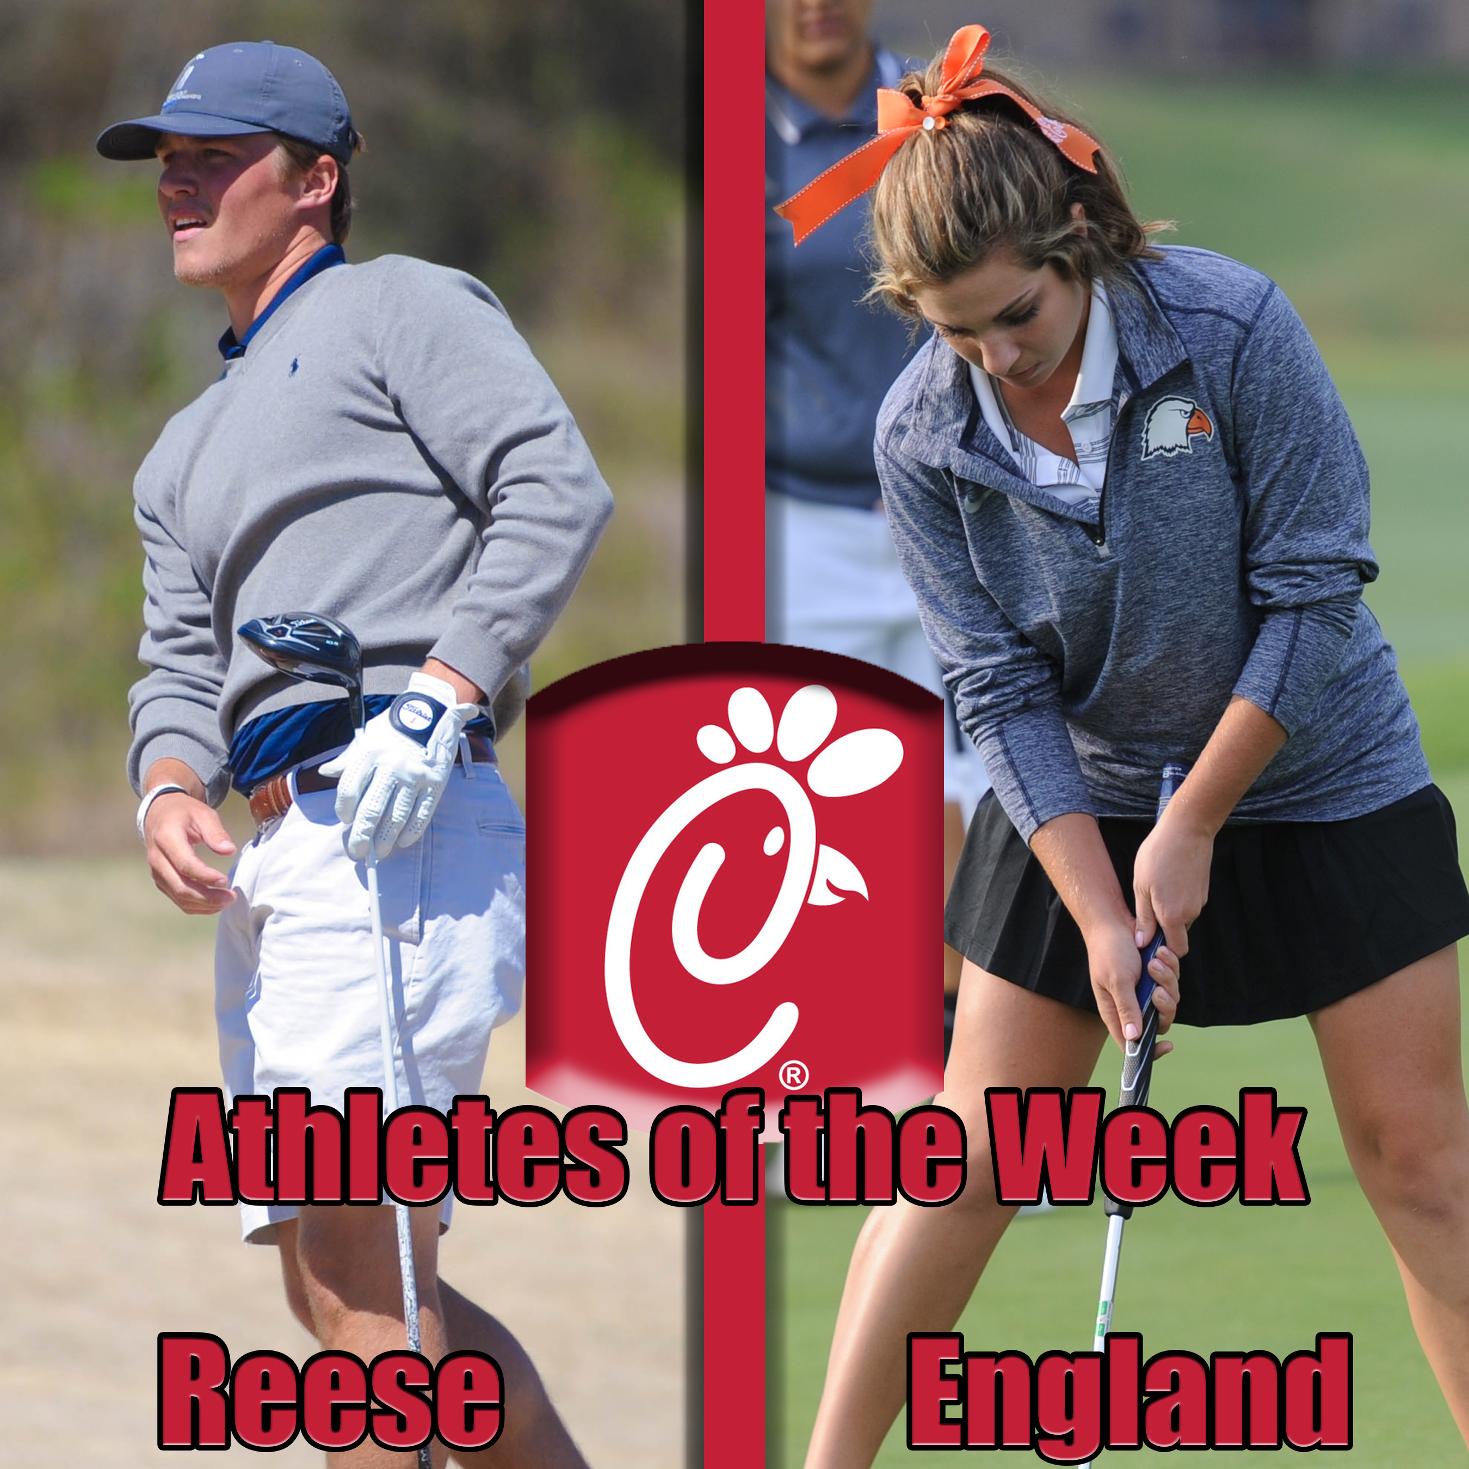 Golfers sweep Chick-Fil-A Athlete of the Week honors